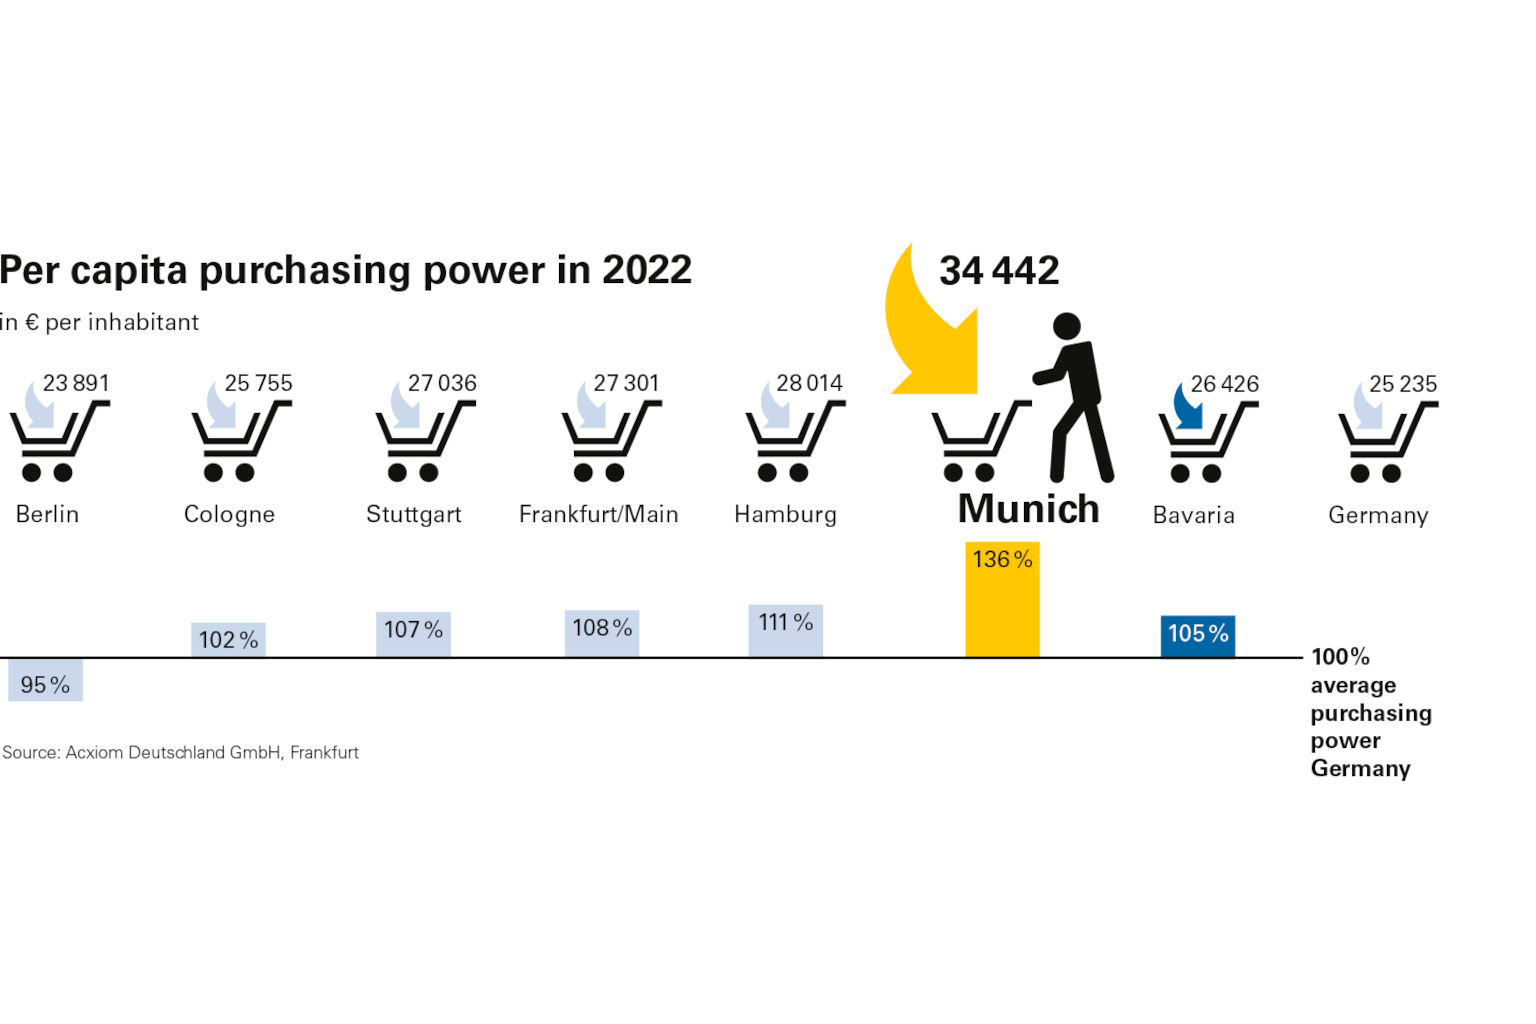 Purchasing power 2022 compared